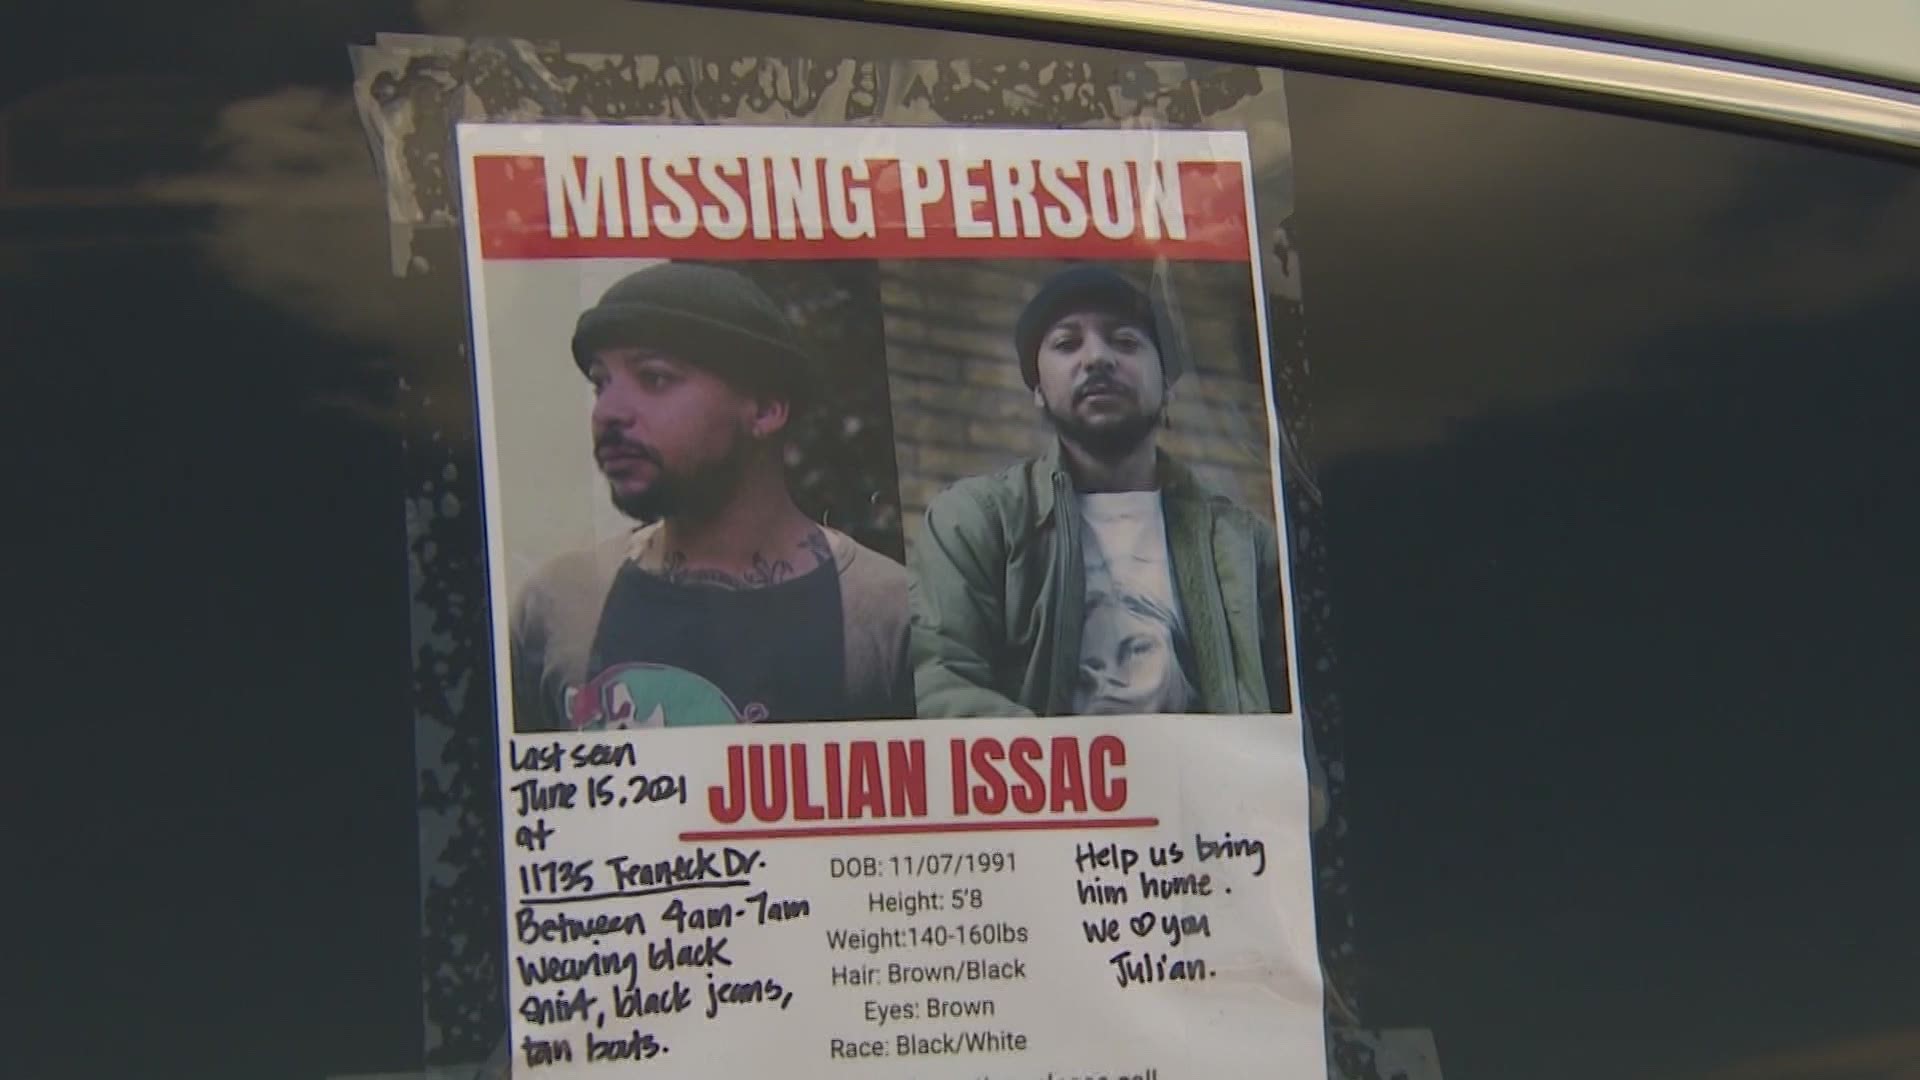 A body was found Saturday during a search for 29-year-old Julian Issac who has been missing since Tuesday morning.